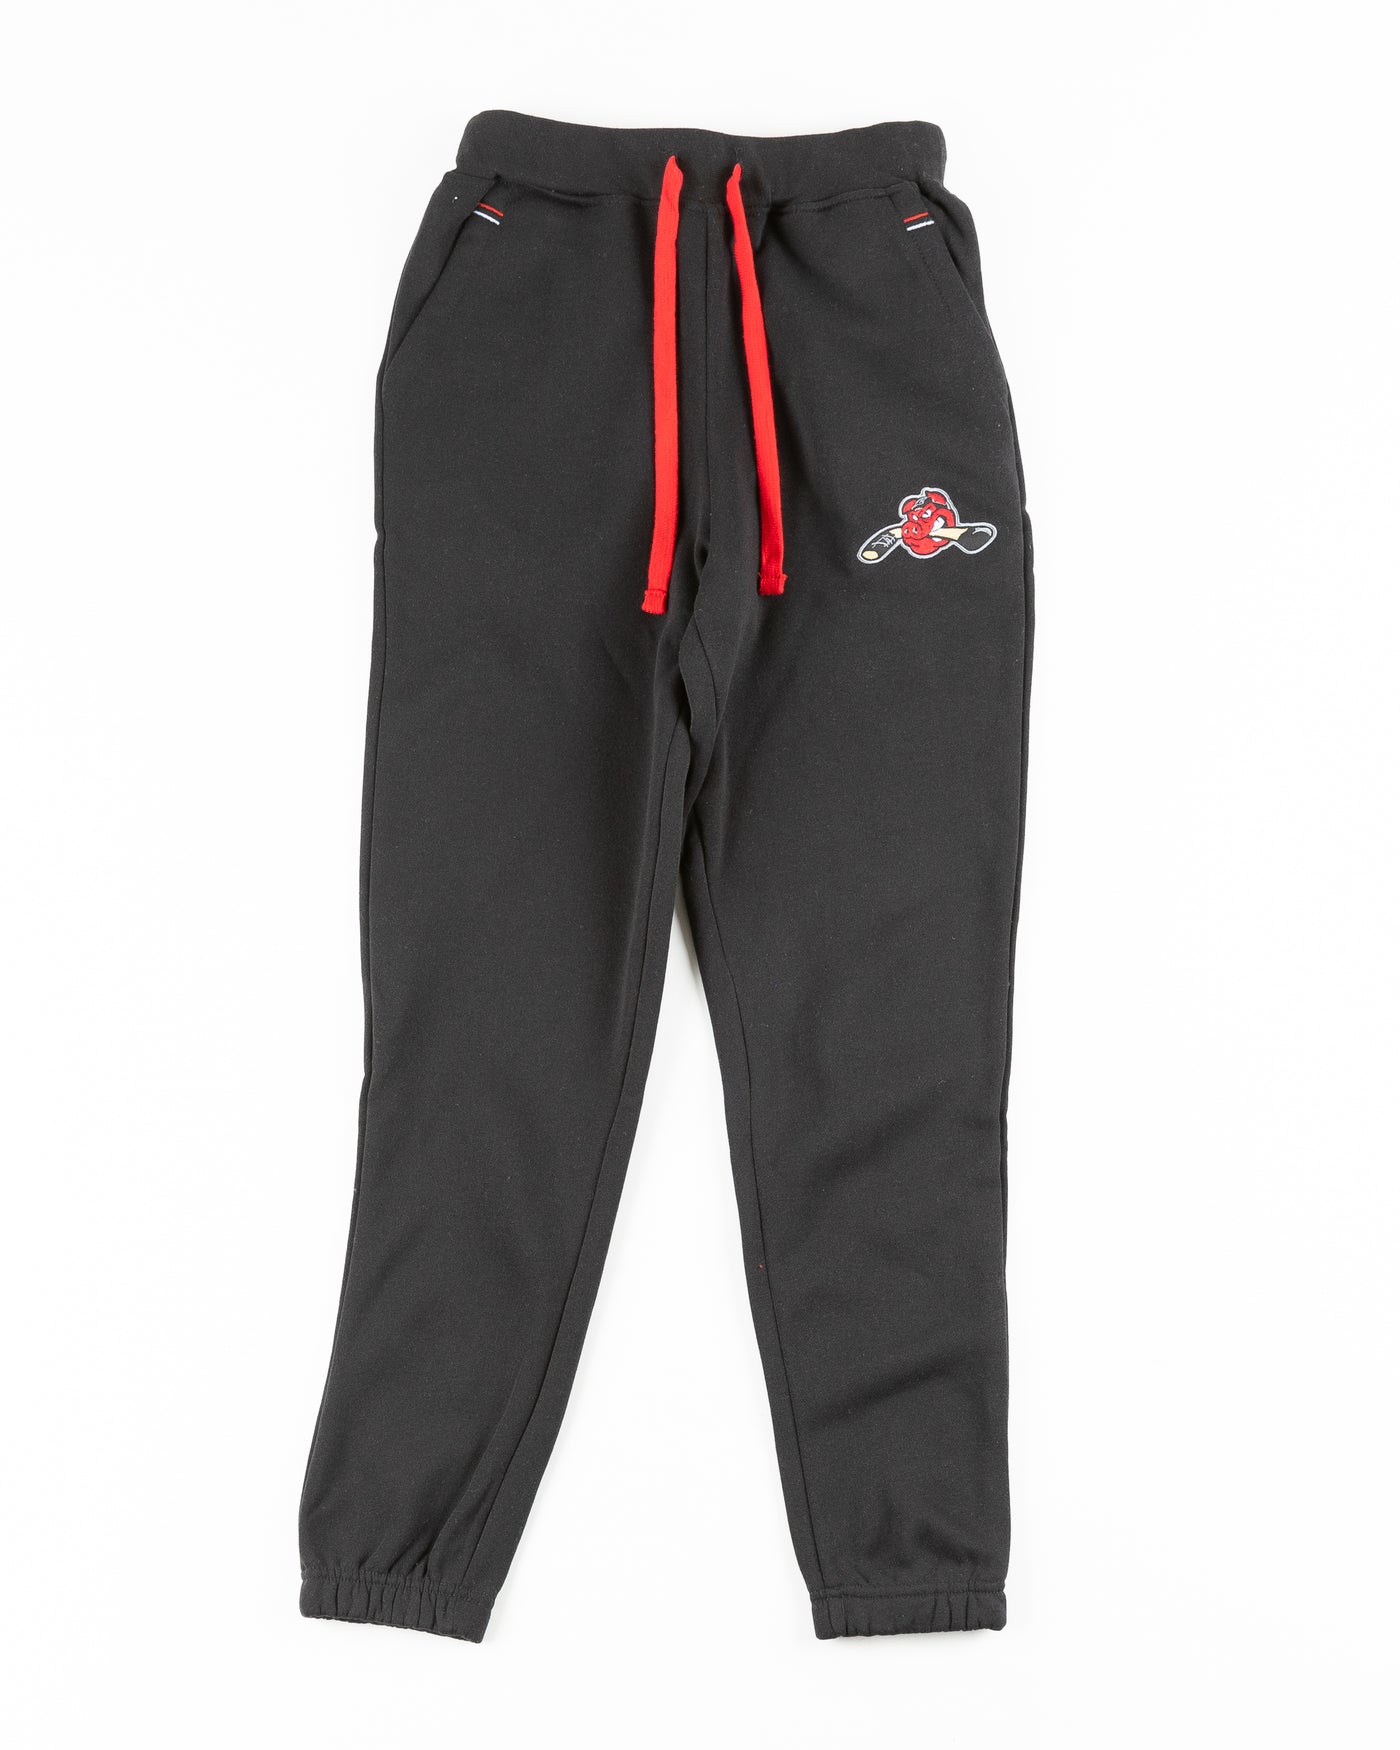 black Rockford IceHogs sweatpants with embroidered Hammy logo on left thigh - front lay flat